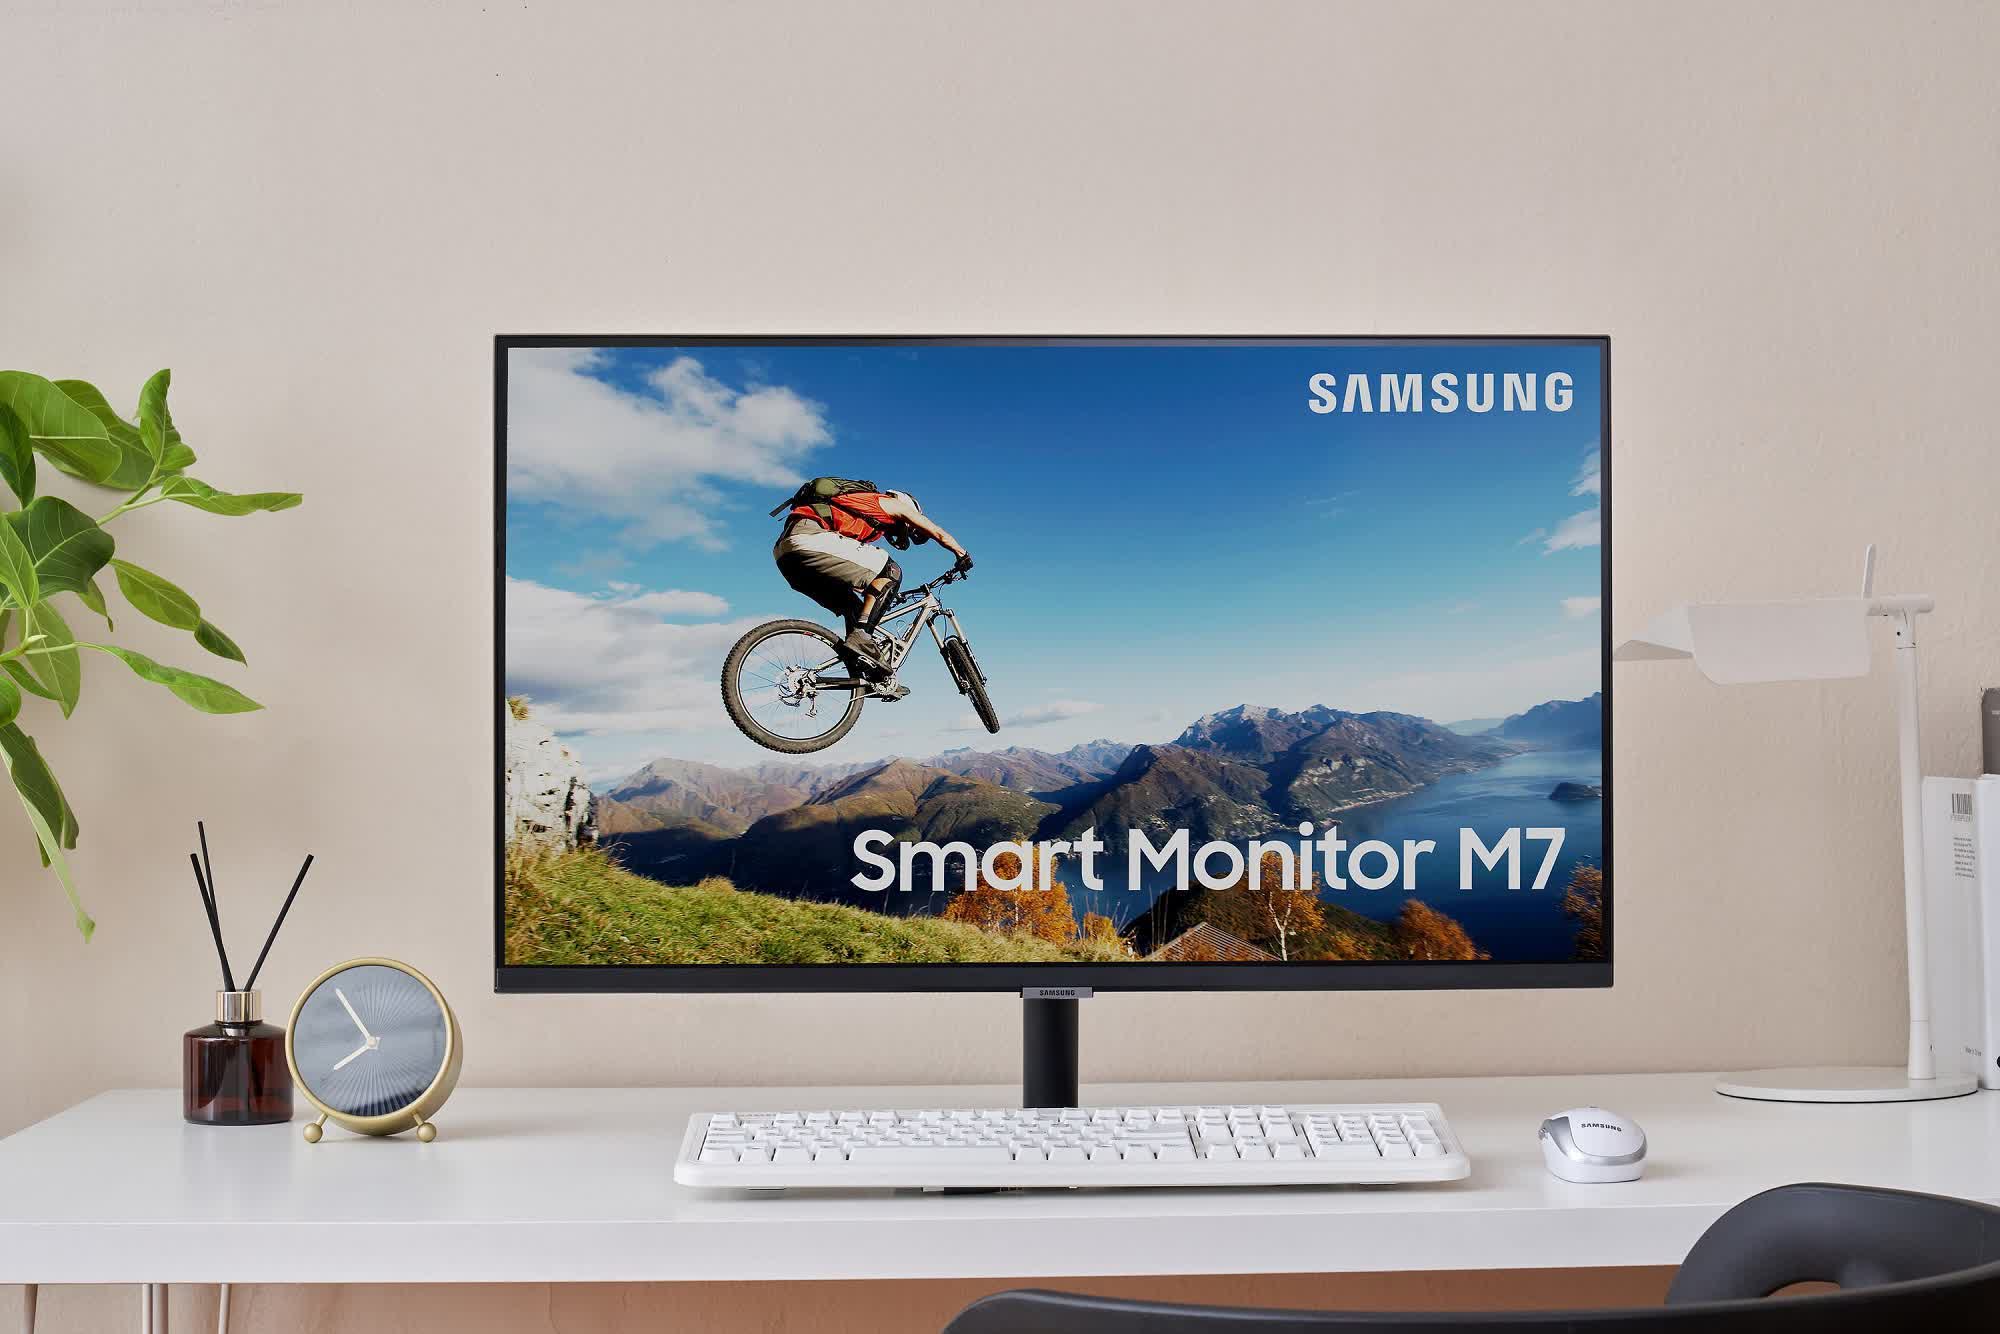 Samsung's all-in-one display is a PC monitor, smart TV, and more